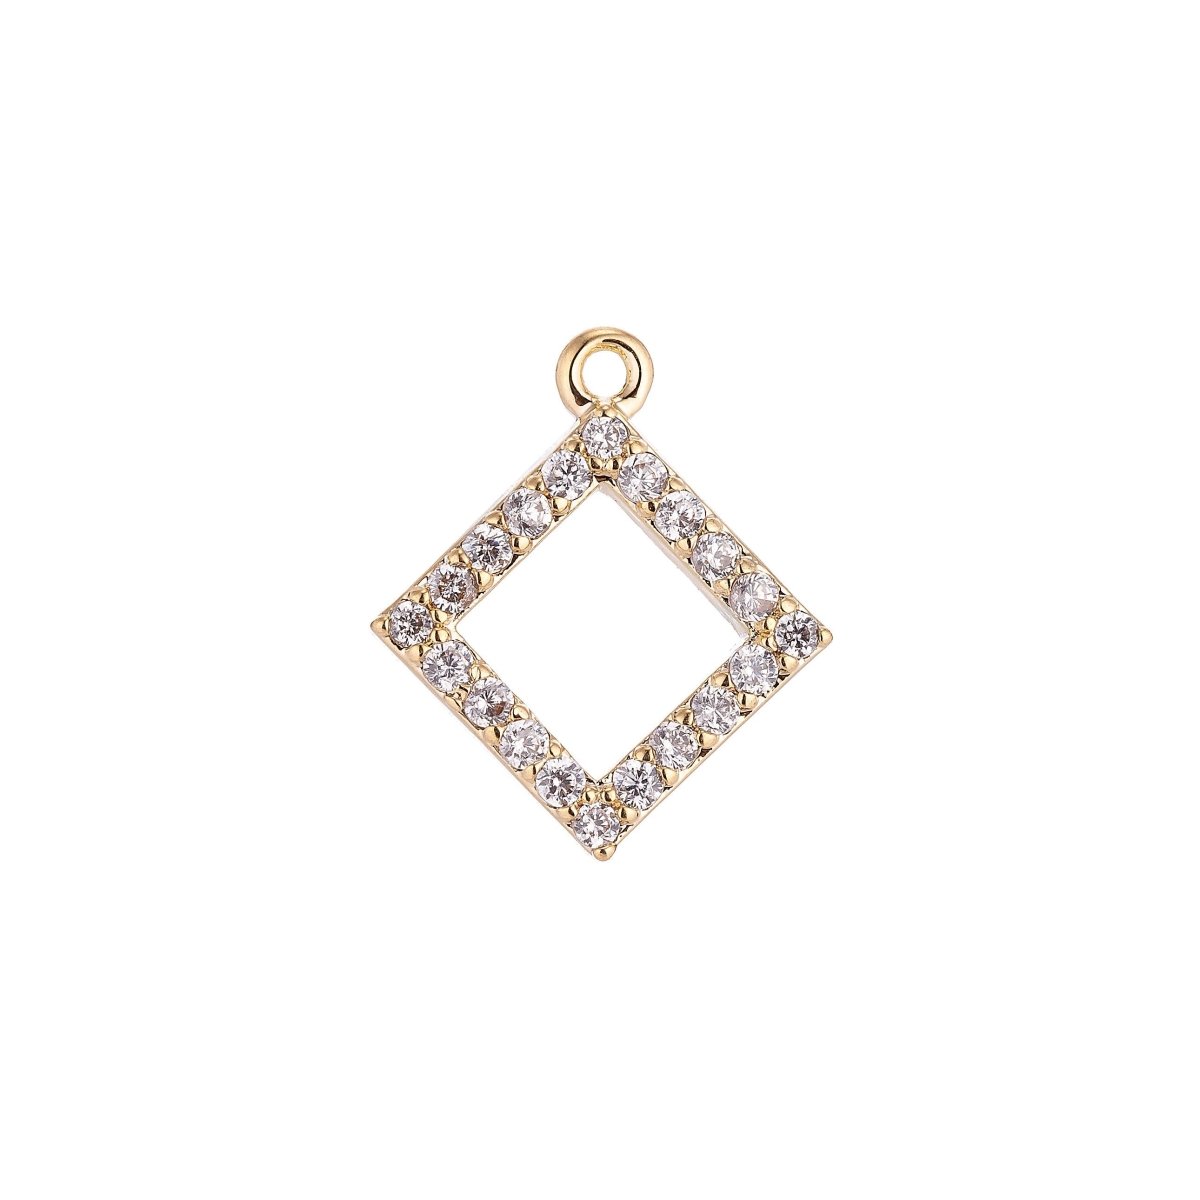 16x15mm 18K Gold Filled Rhombus Shape Micro Pave Geometric Charm Cubic Charm Bracelet Necklace Pendant Earring Gift for Jewelry Making, D-068 - DLUXCA